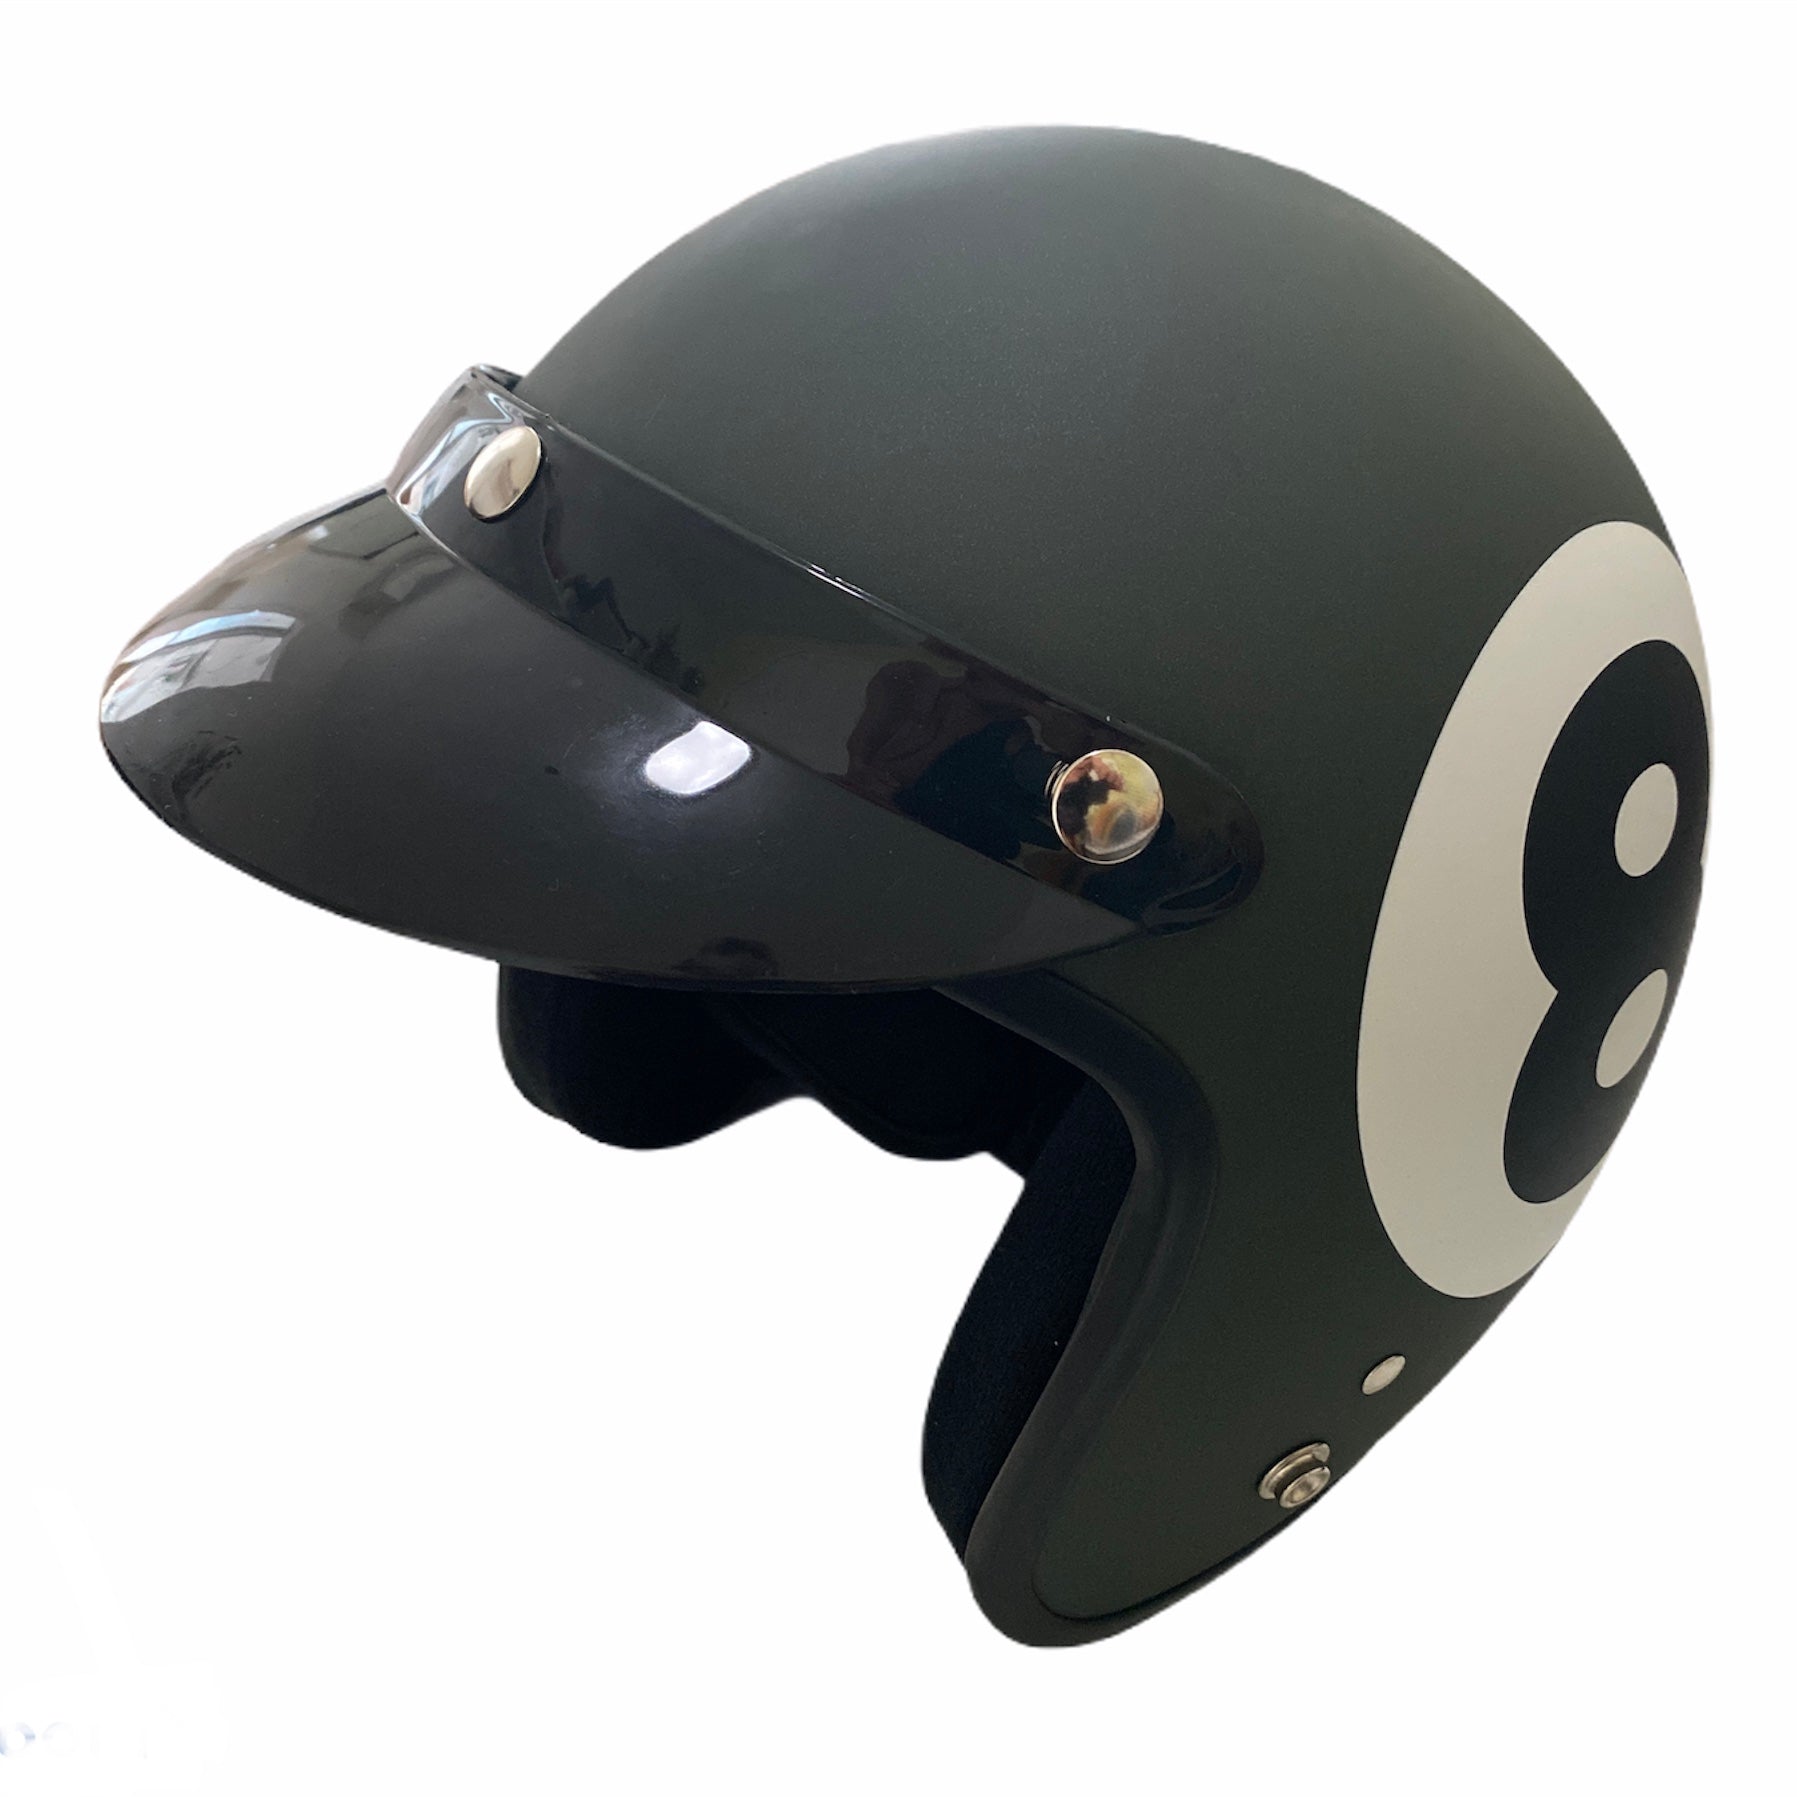 Cyclone Open Face Motorcycle Helmet DOT/ECE Approved - Matte Black - Small